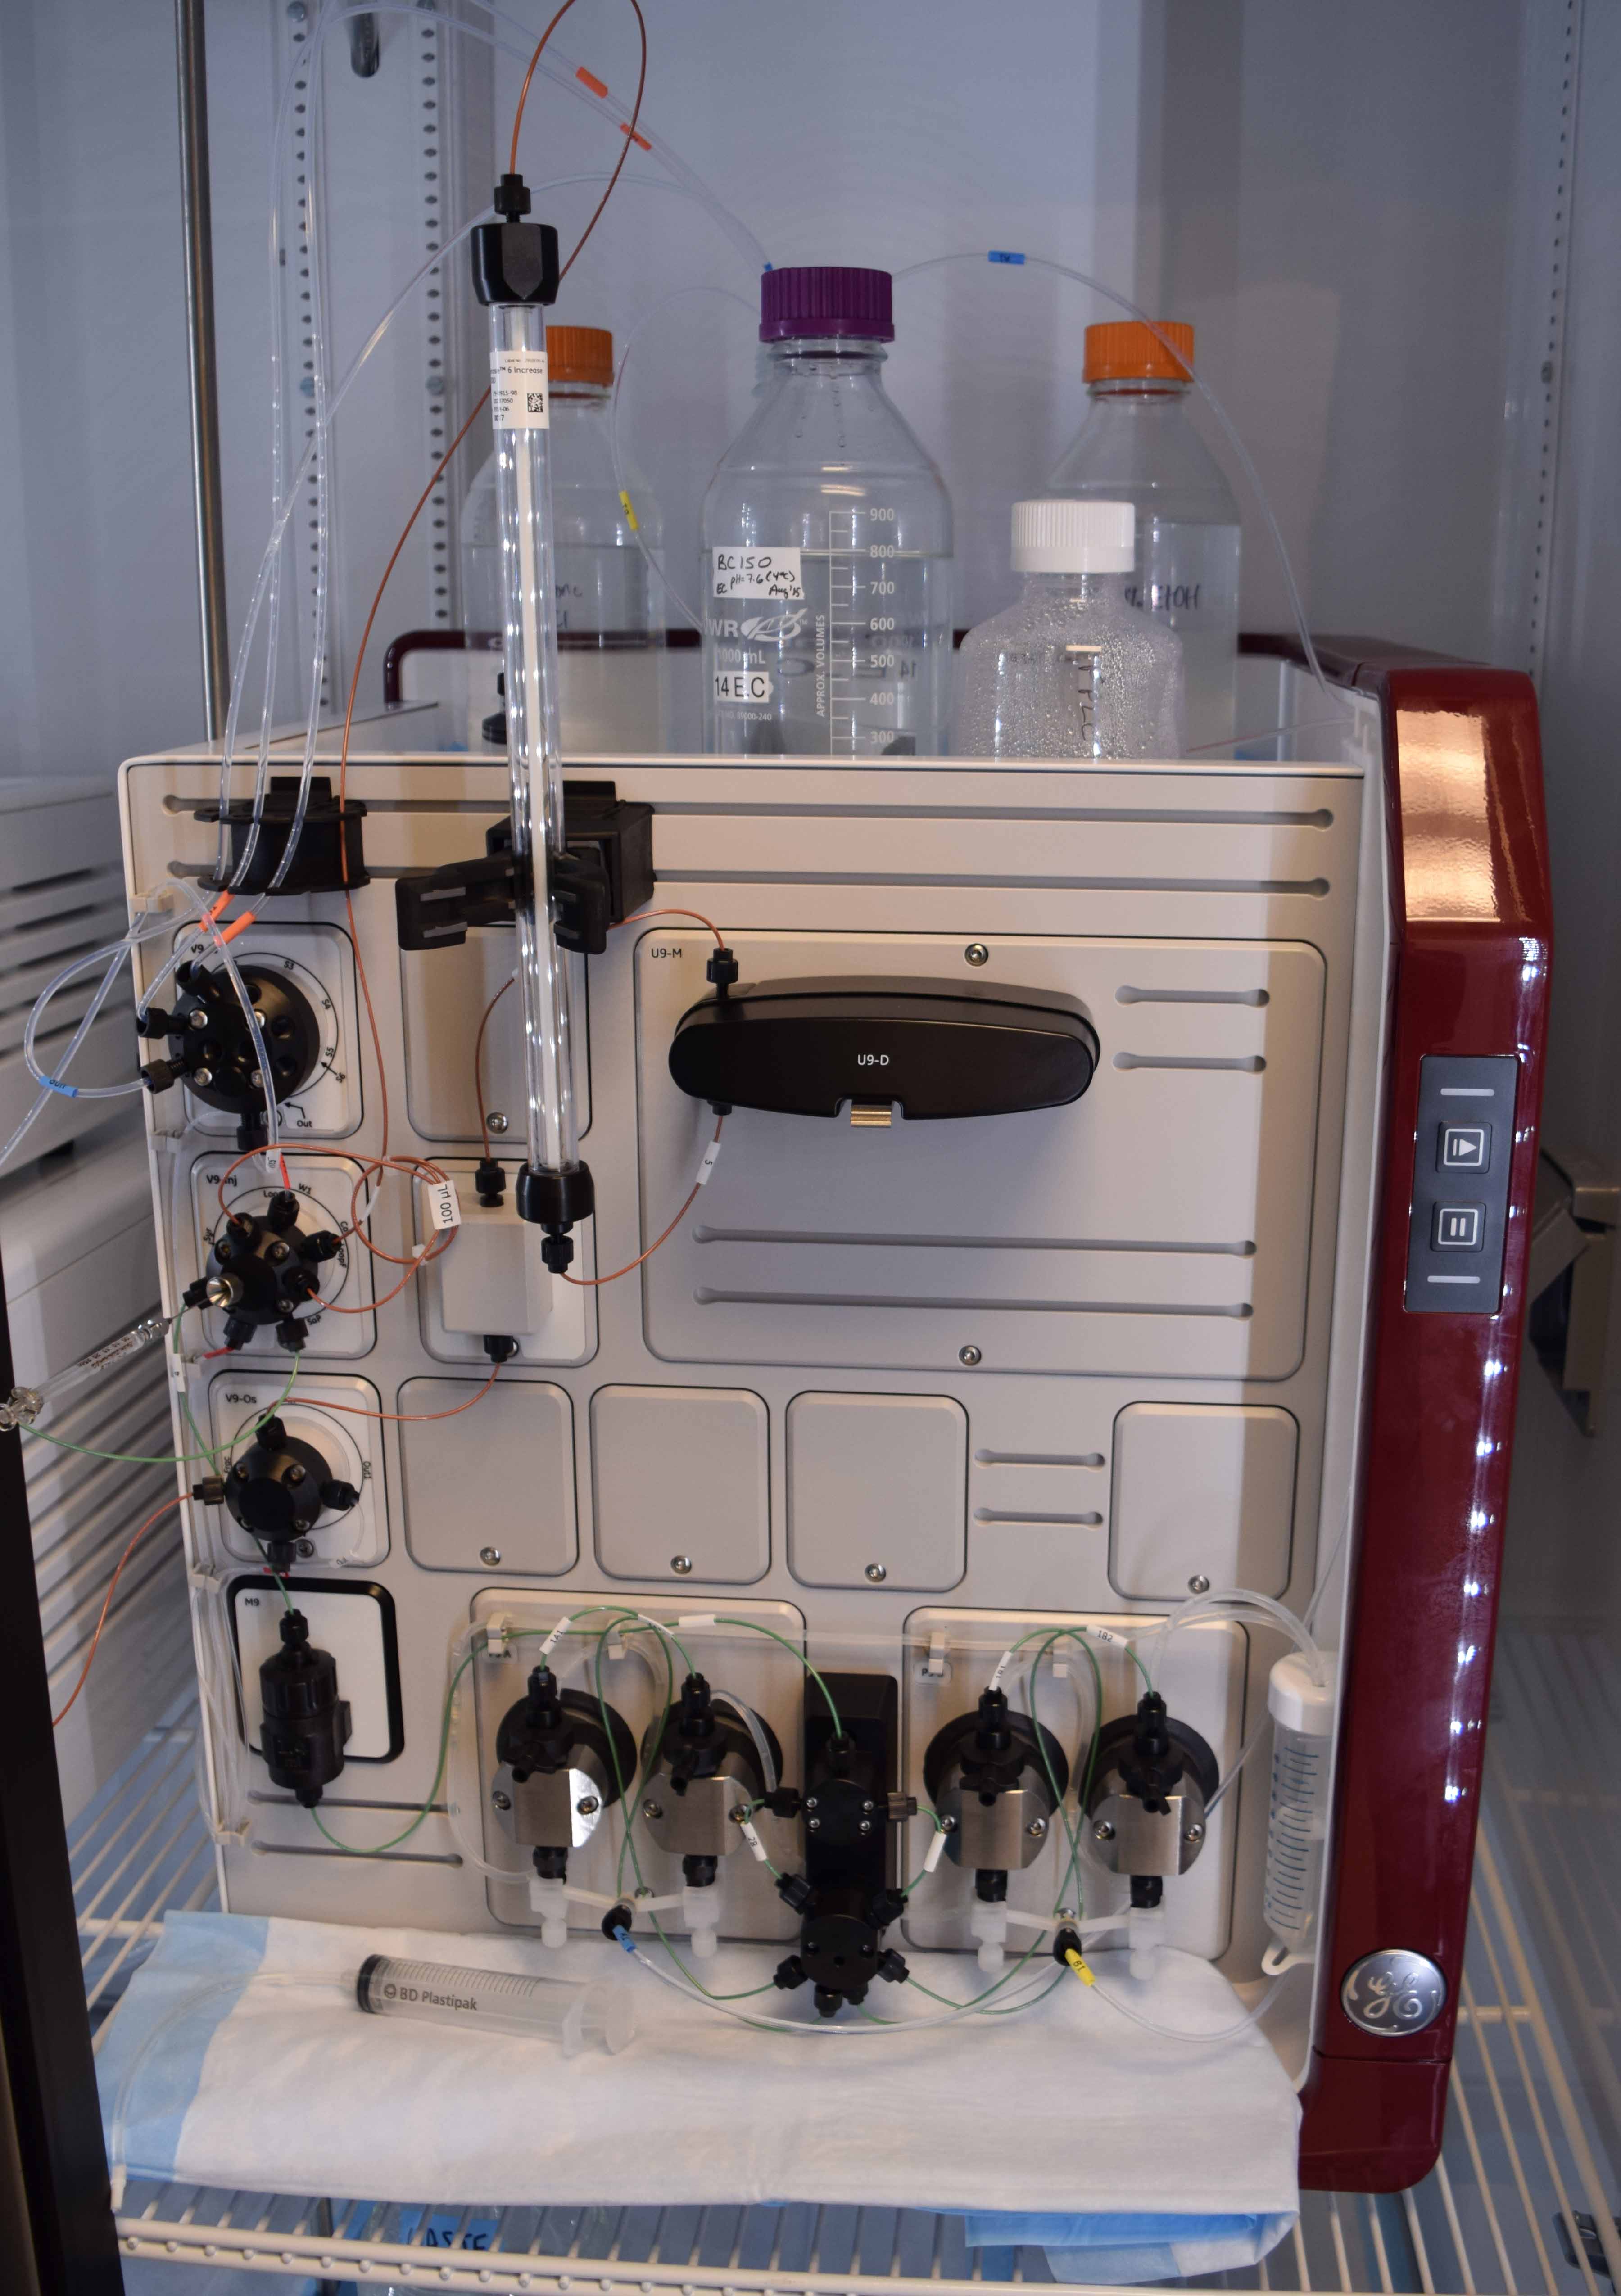 Picture of the lab's Fast Protein Liquid Chromatography (FPLC) machine, sitting in a large refrigerating unit.